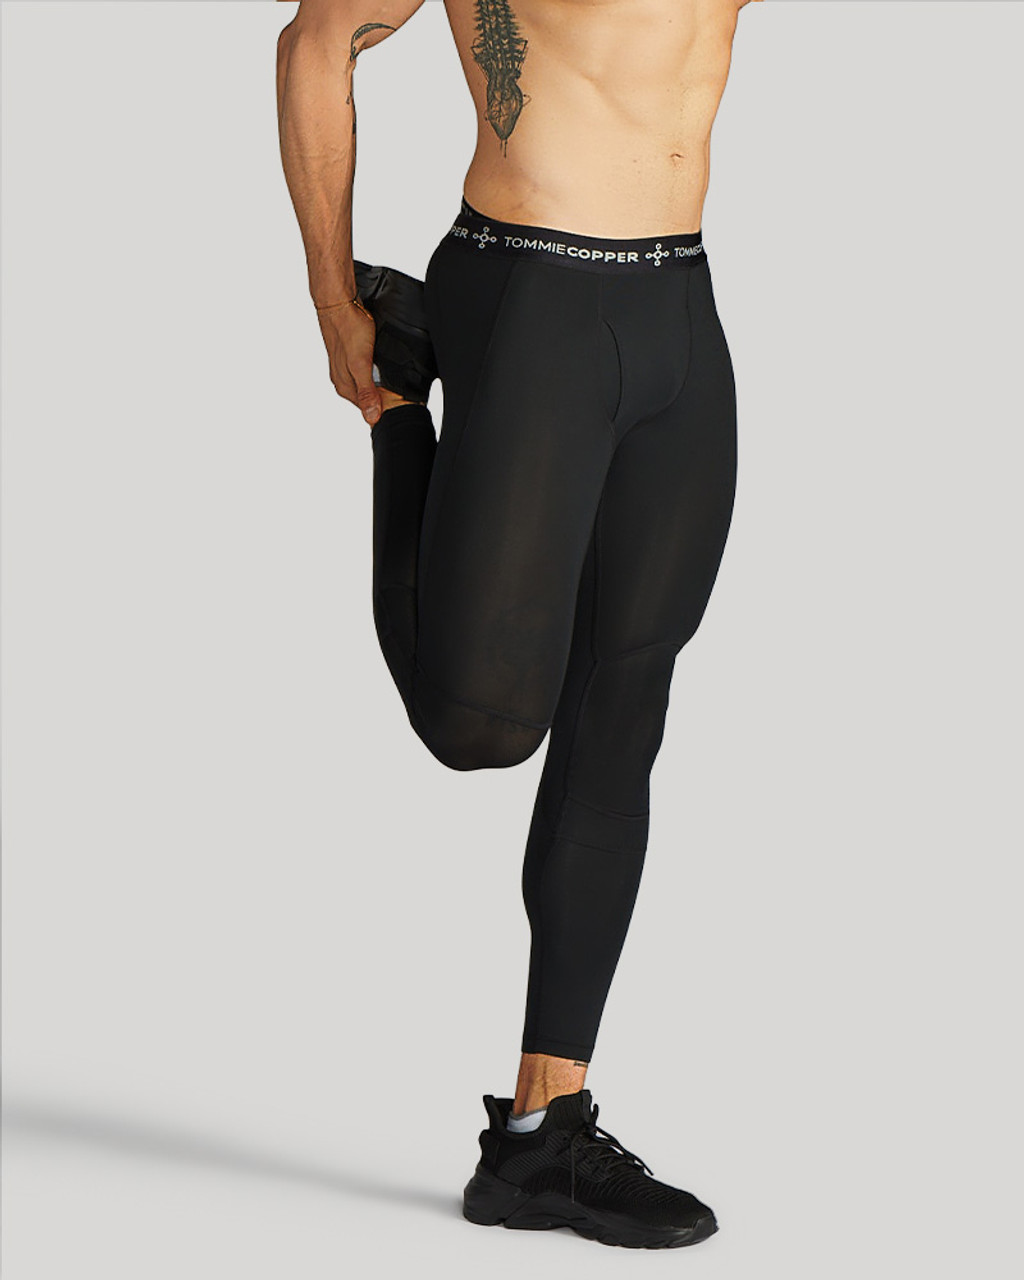 Knee Compression Tights, Top Knee Support